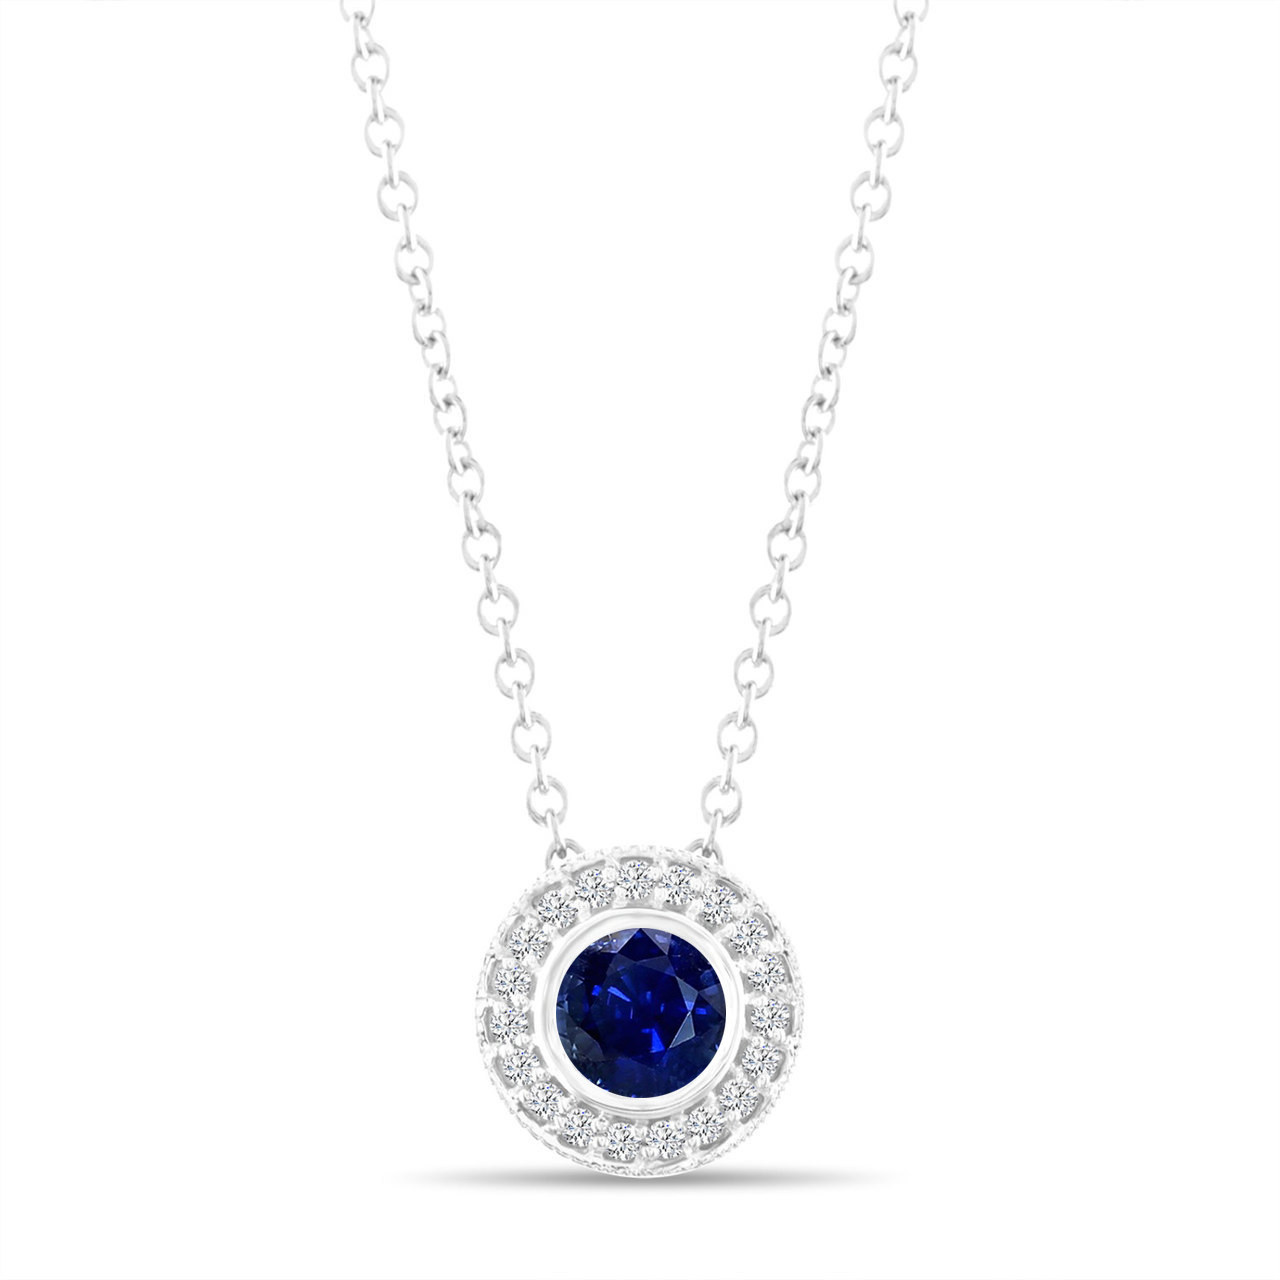 White Gold Round Sapphire Necklace | A. T. Thomas Jewelers | Jewelry Store  | Lincoln, NE